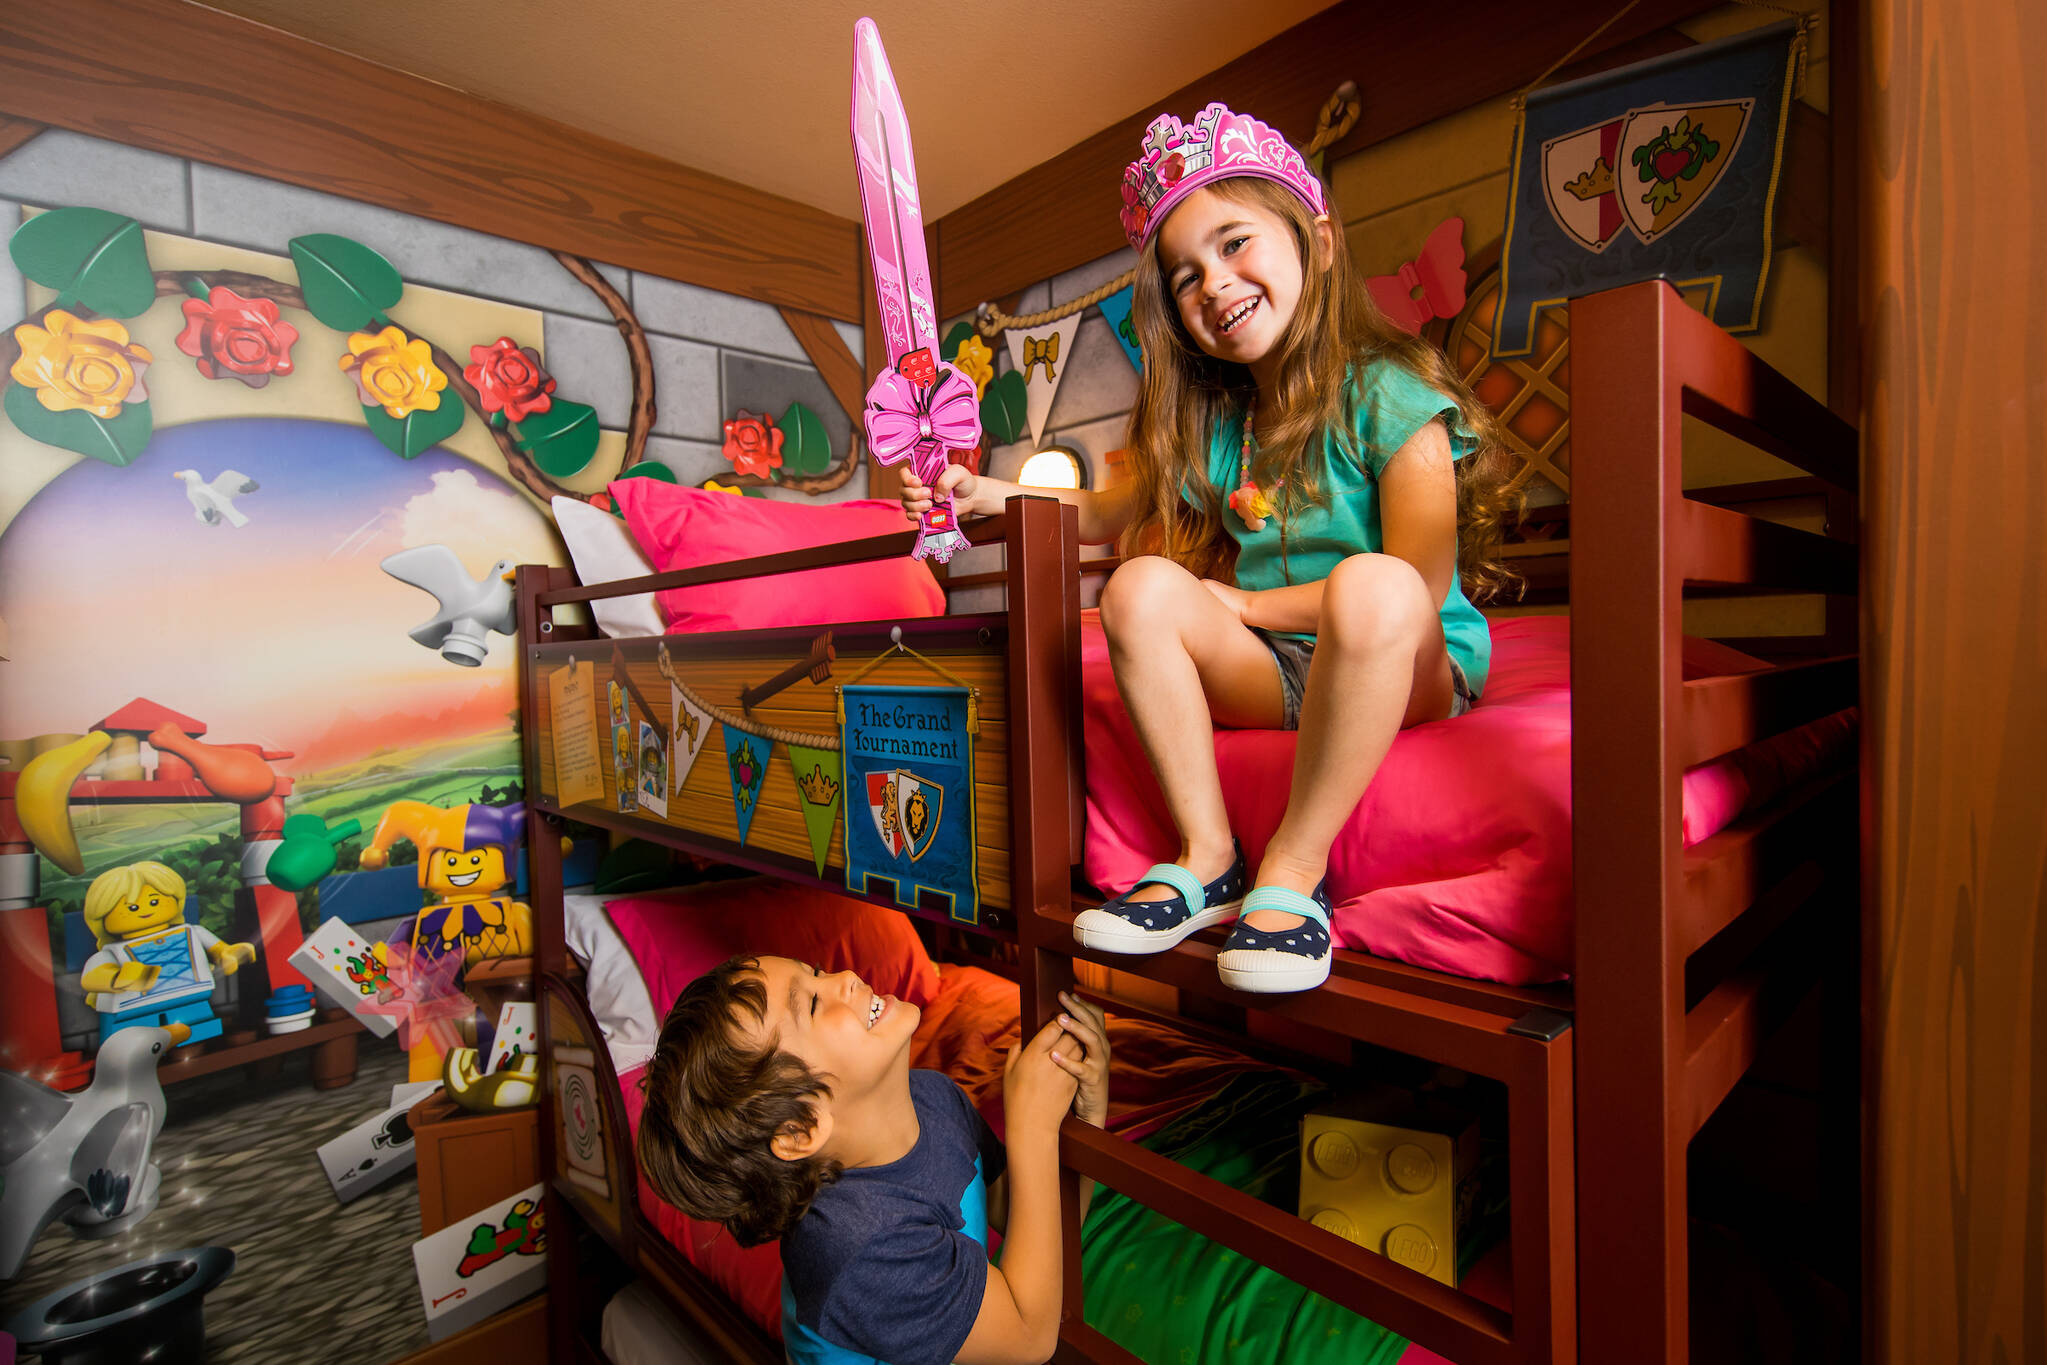 Boy and Girl on Bunk Bed in Princess Room